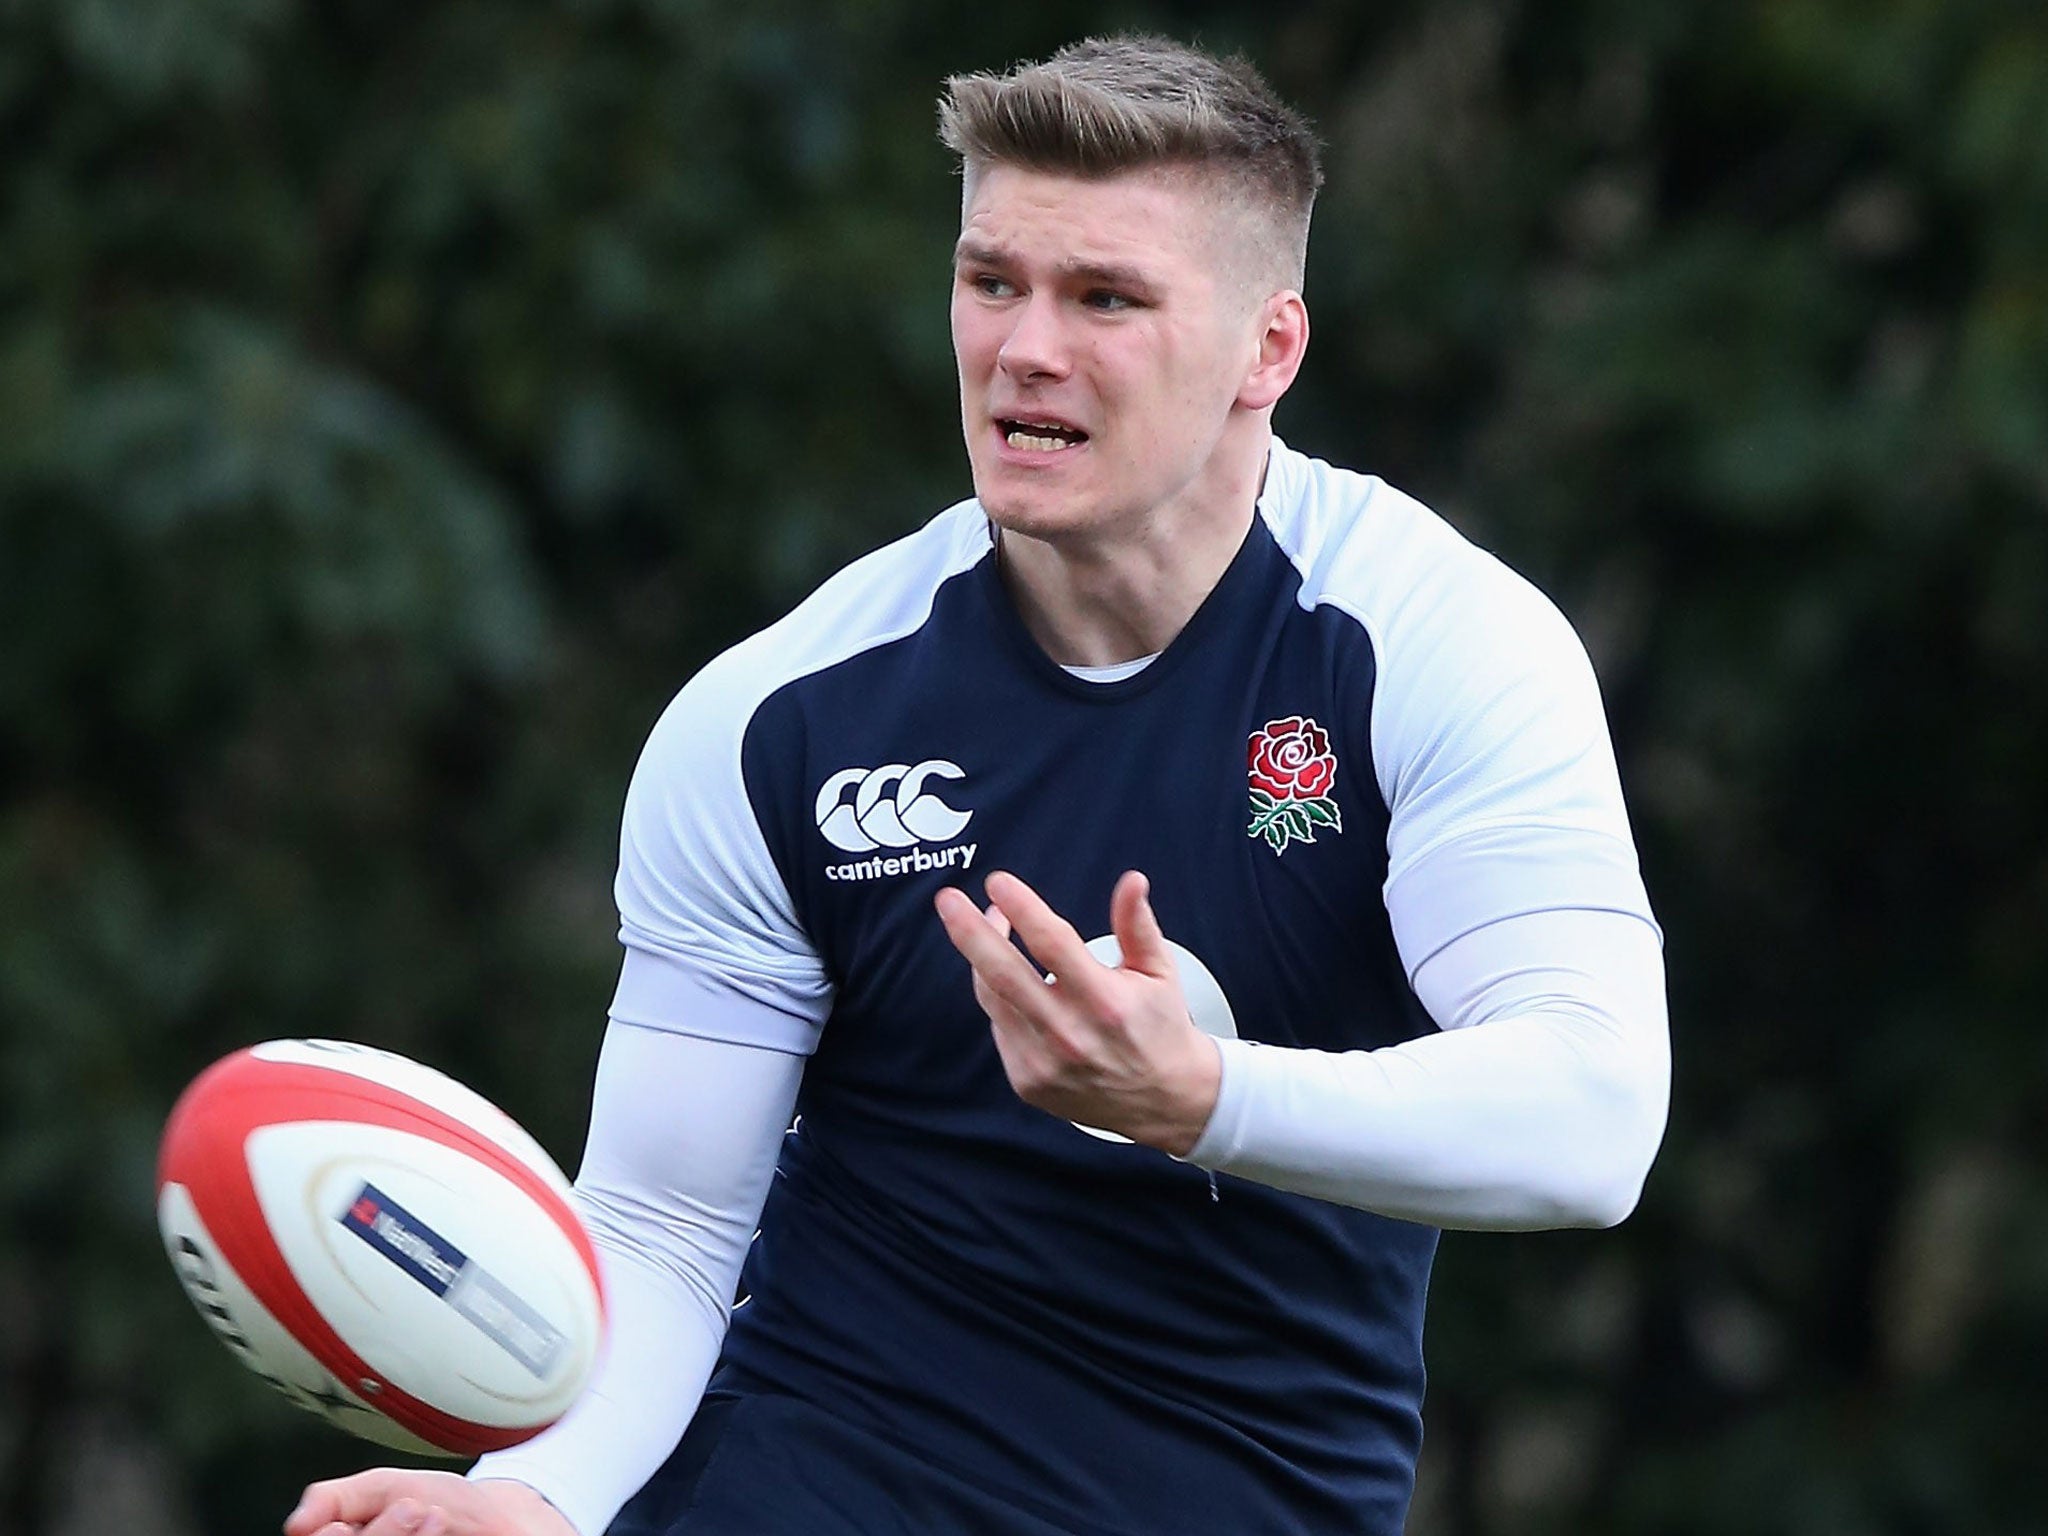 Owen Farrell passes the ball during England training at Pennyhill Park